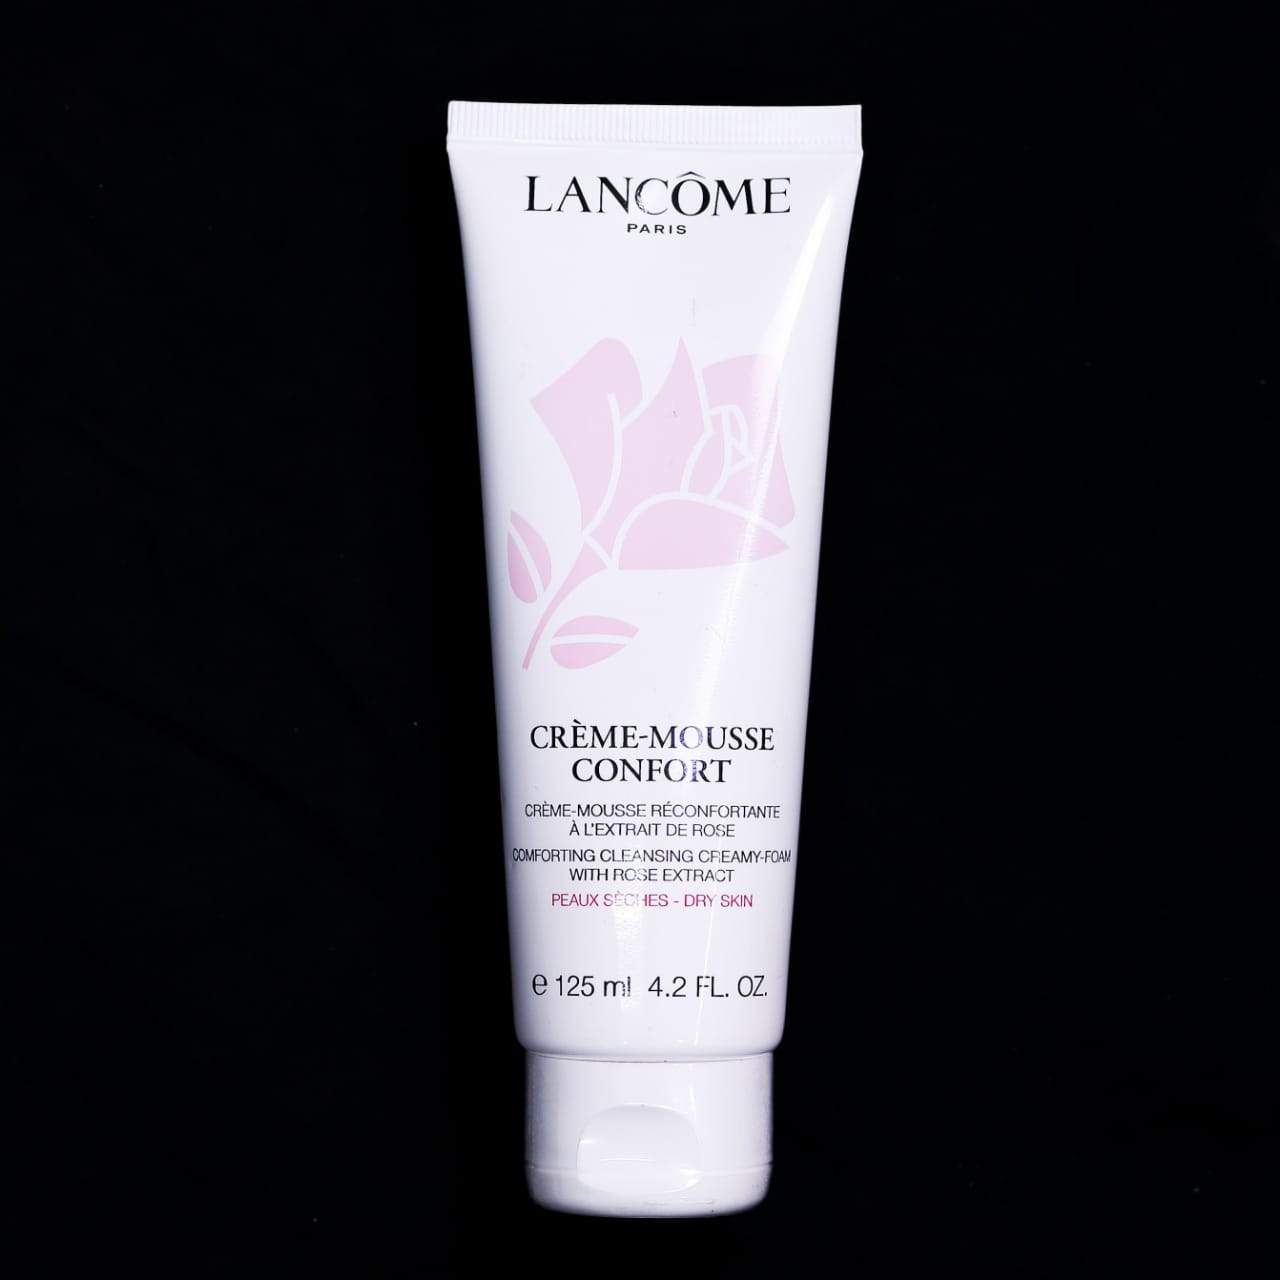 LANCOME COMFORTING CLEANSER CREME-MOUSSE CONFORT